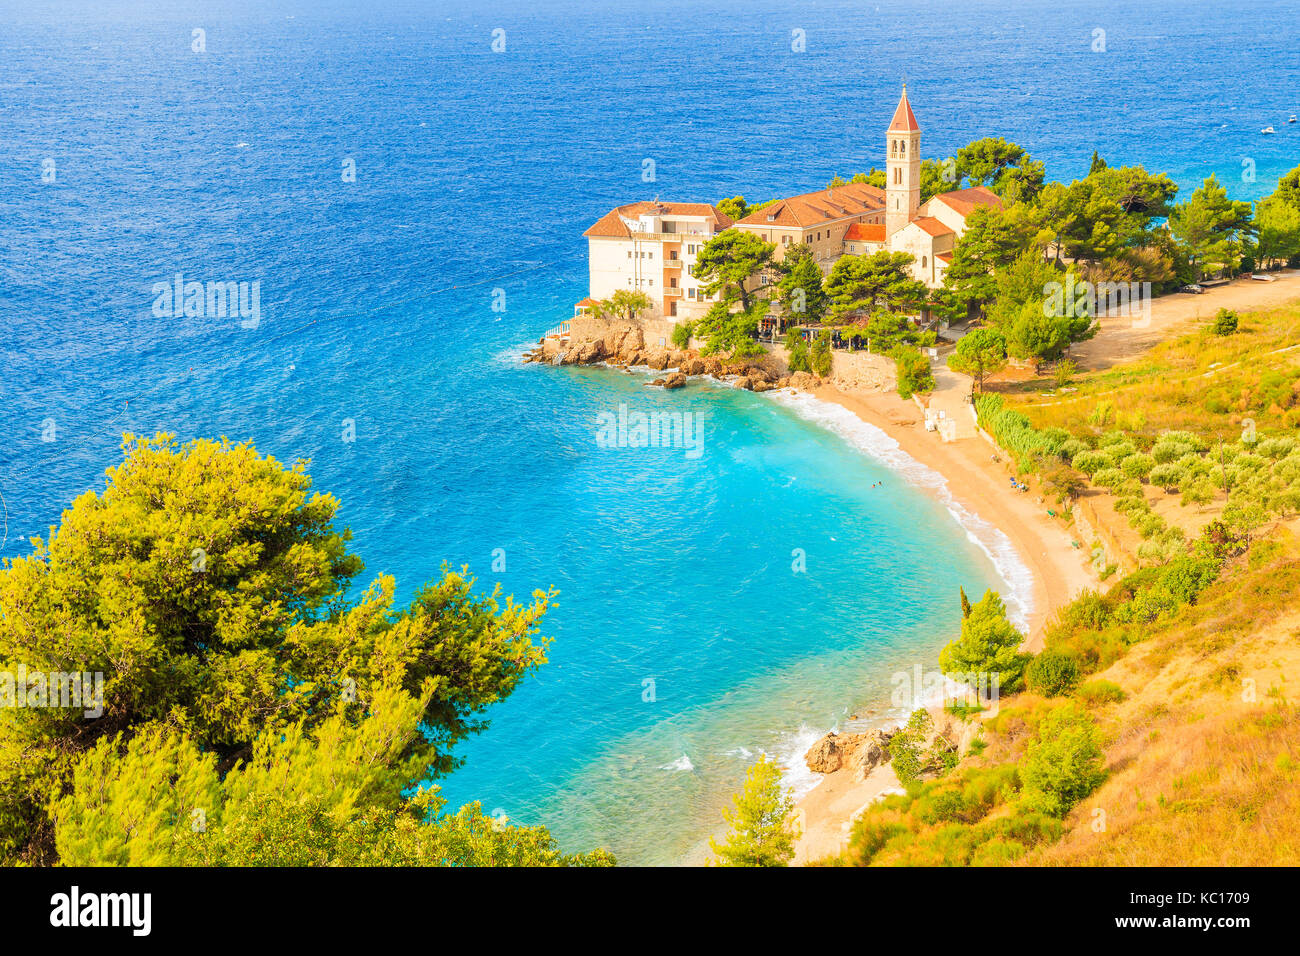 View of sea bay and beach with famous Dominican monastery in Bol town, Brac island, Croatia Stock Photo